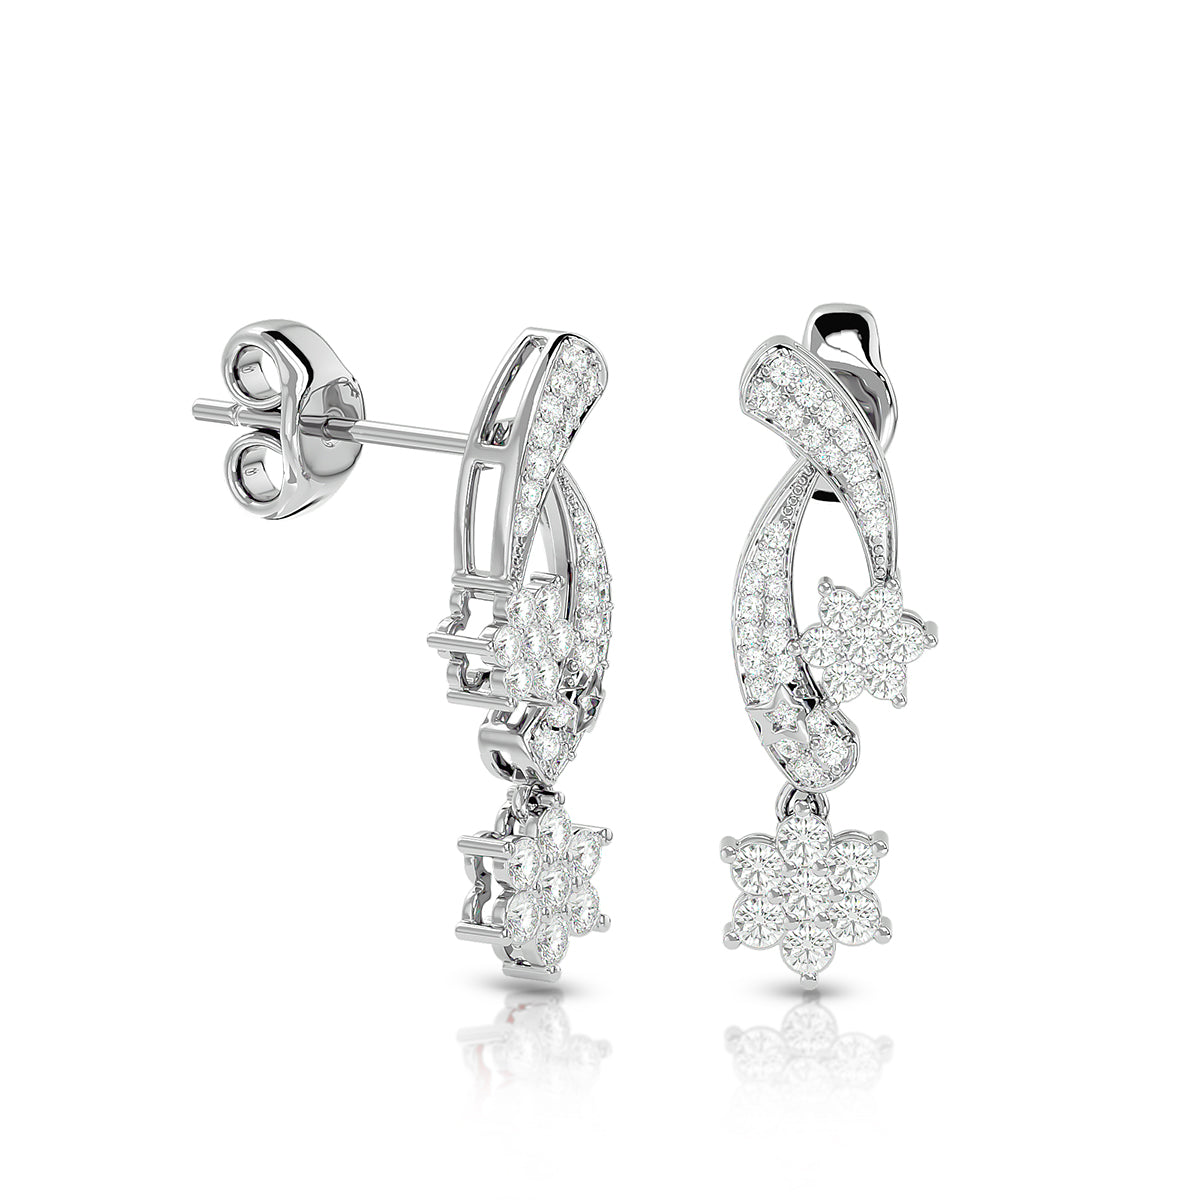 Persona Earrings 18K White Gold With Diamonds